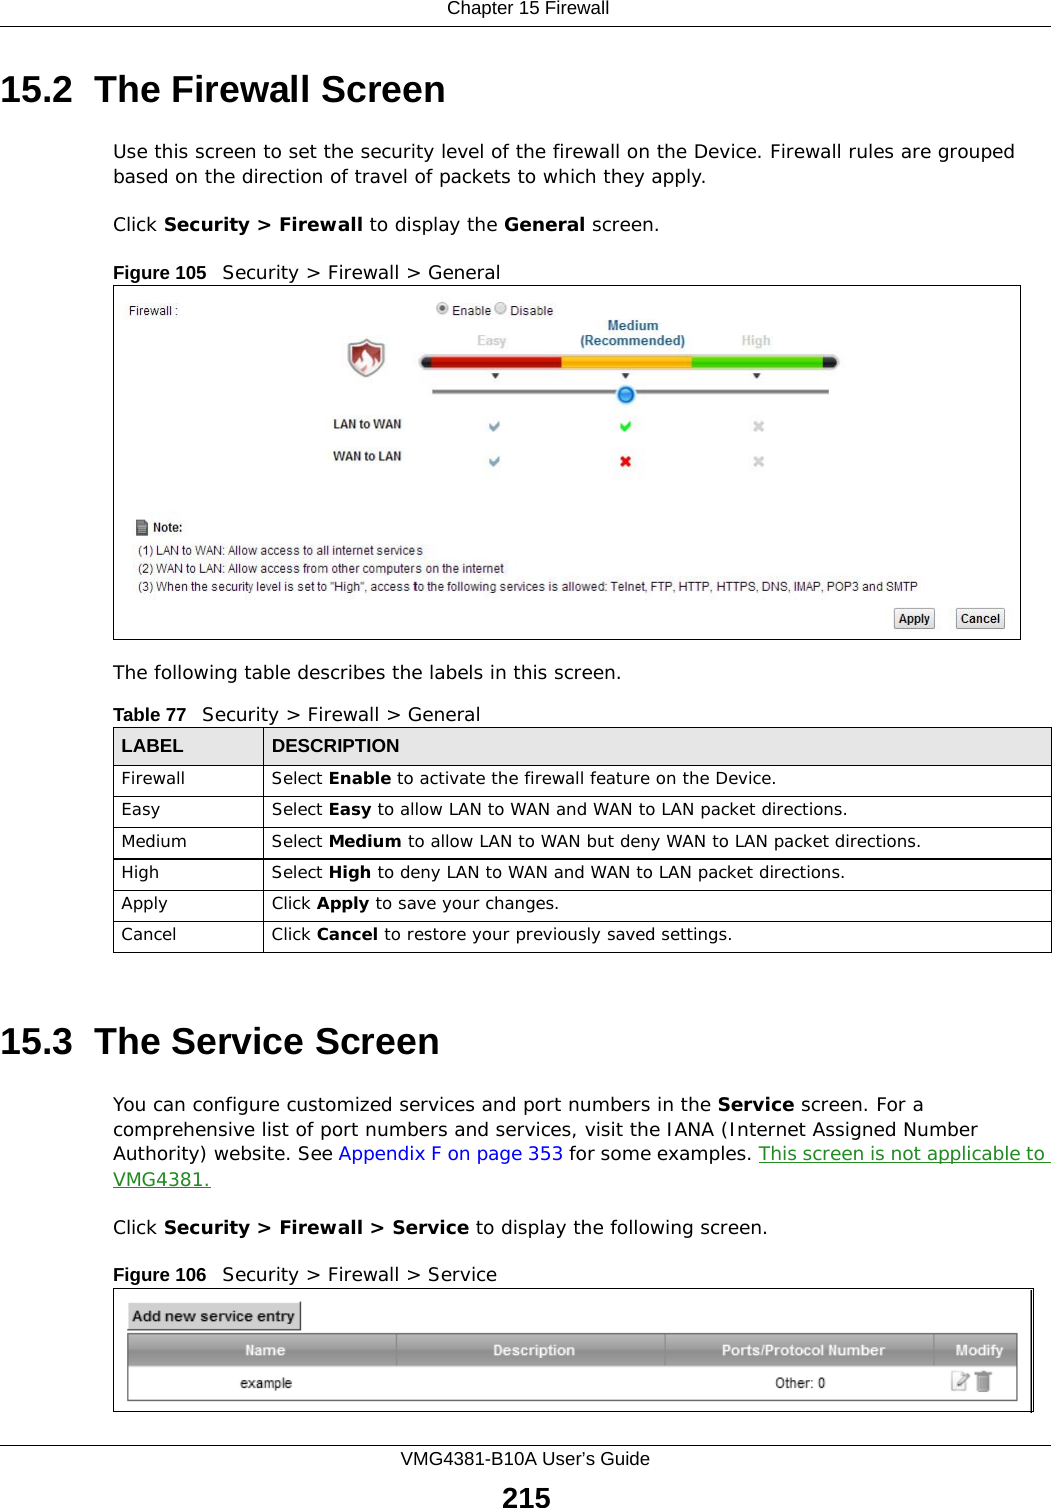  Chapter 15 FirewallVMG4381-B10A User’s Guide21515.2  The Firewall ScreenUse this screen to set the security level of the firewall on the Device. Firewall rules are grouped based on the direction of travel of packets to which they apply. Click Security &gt; Firewall to display the General screen. Figure 105   Security &gt; Firewall &gt; GeneralThe following table describes the labels in this screen.15.3  The Service Screen You can configure customized services and port numbers in the Service screen. For a comprehensive list of port numbers and services, visit the IANA (Internet Assigned Number Authority) website. See Appendix F on page 353 for some examples. This screen is not applicable to VMG4381.Click Security &gt; Firewall &gt; Service to display the following screen.Figure 106   Security &gt; Firewall &gt; Service Table 77   Security &gt; Firewall &gt; GeneralLABEL DESCRIPTIONFirewall Select Enable to activate the firewall feature on the Device.Easy Select Easy to allow LAN to WAN and WAN to LAN packet directions.Medium Select Medium to allow LAN to WAN but deny WAN to LAN packet directions.High Select High to deny LAN to WAN and WAN to LAN packet directions.Apply Click Apply to save your changes.Cancel Click Cancel to restore your previously saved settings.